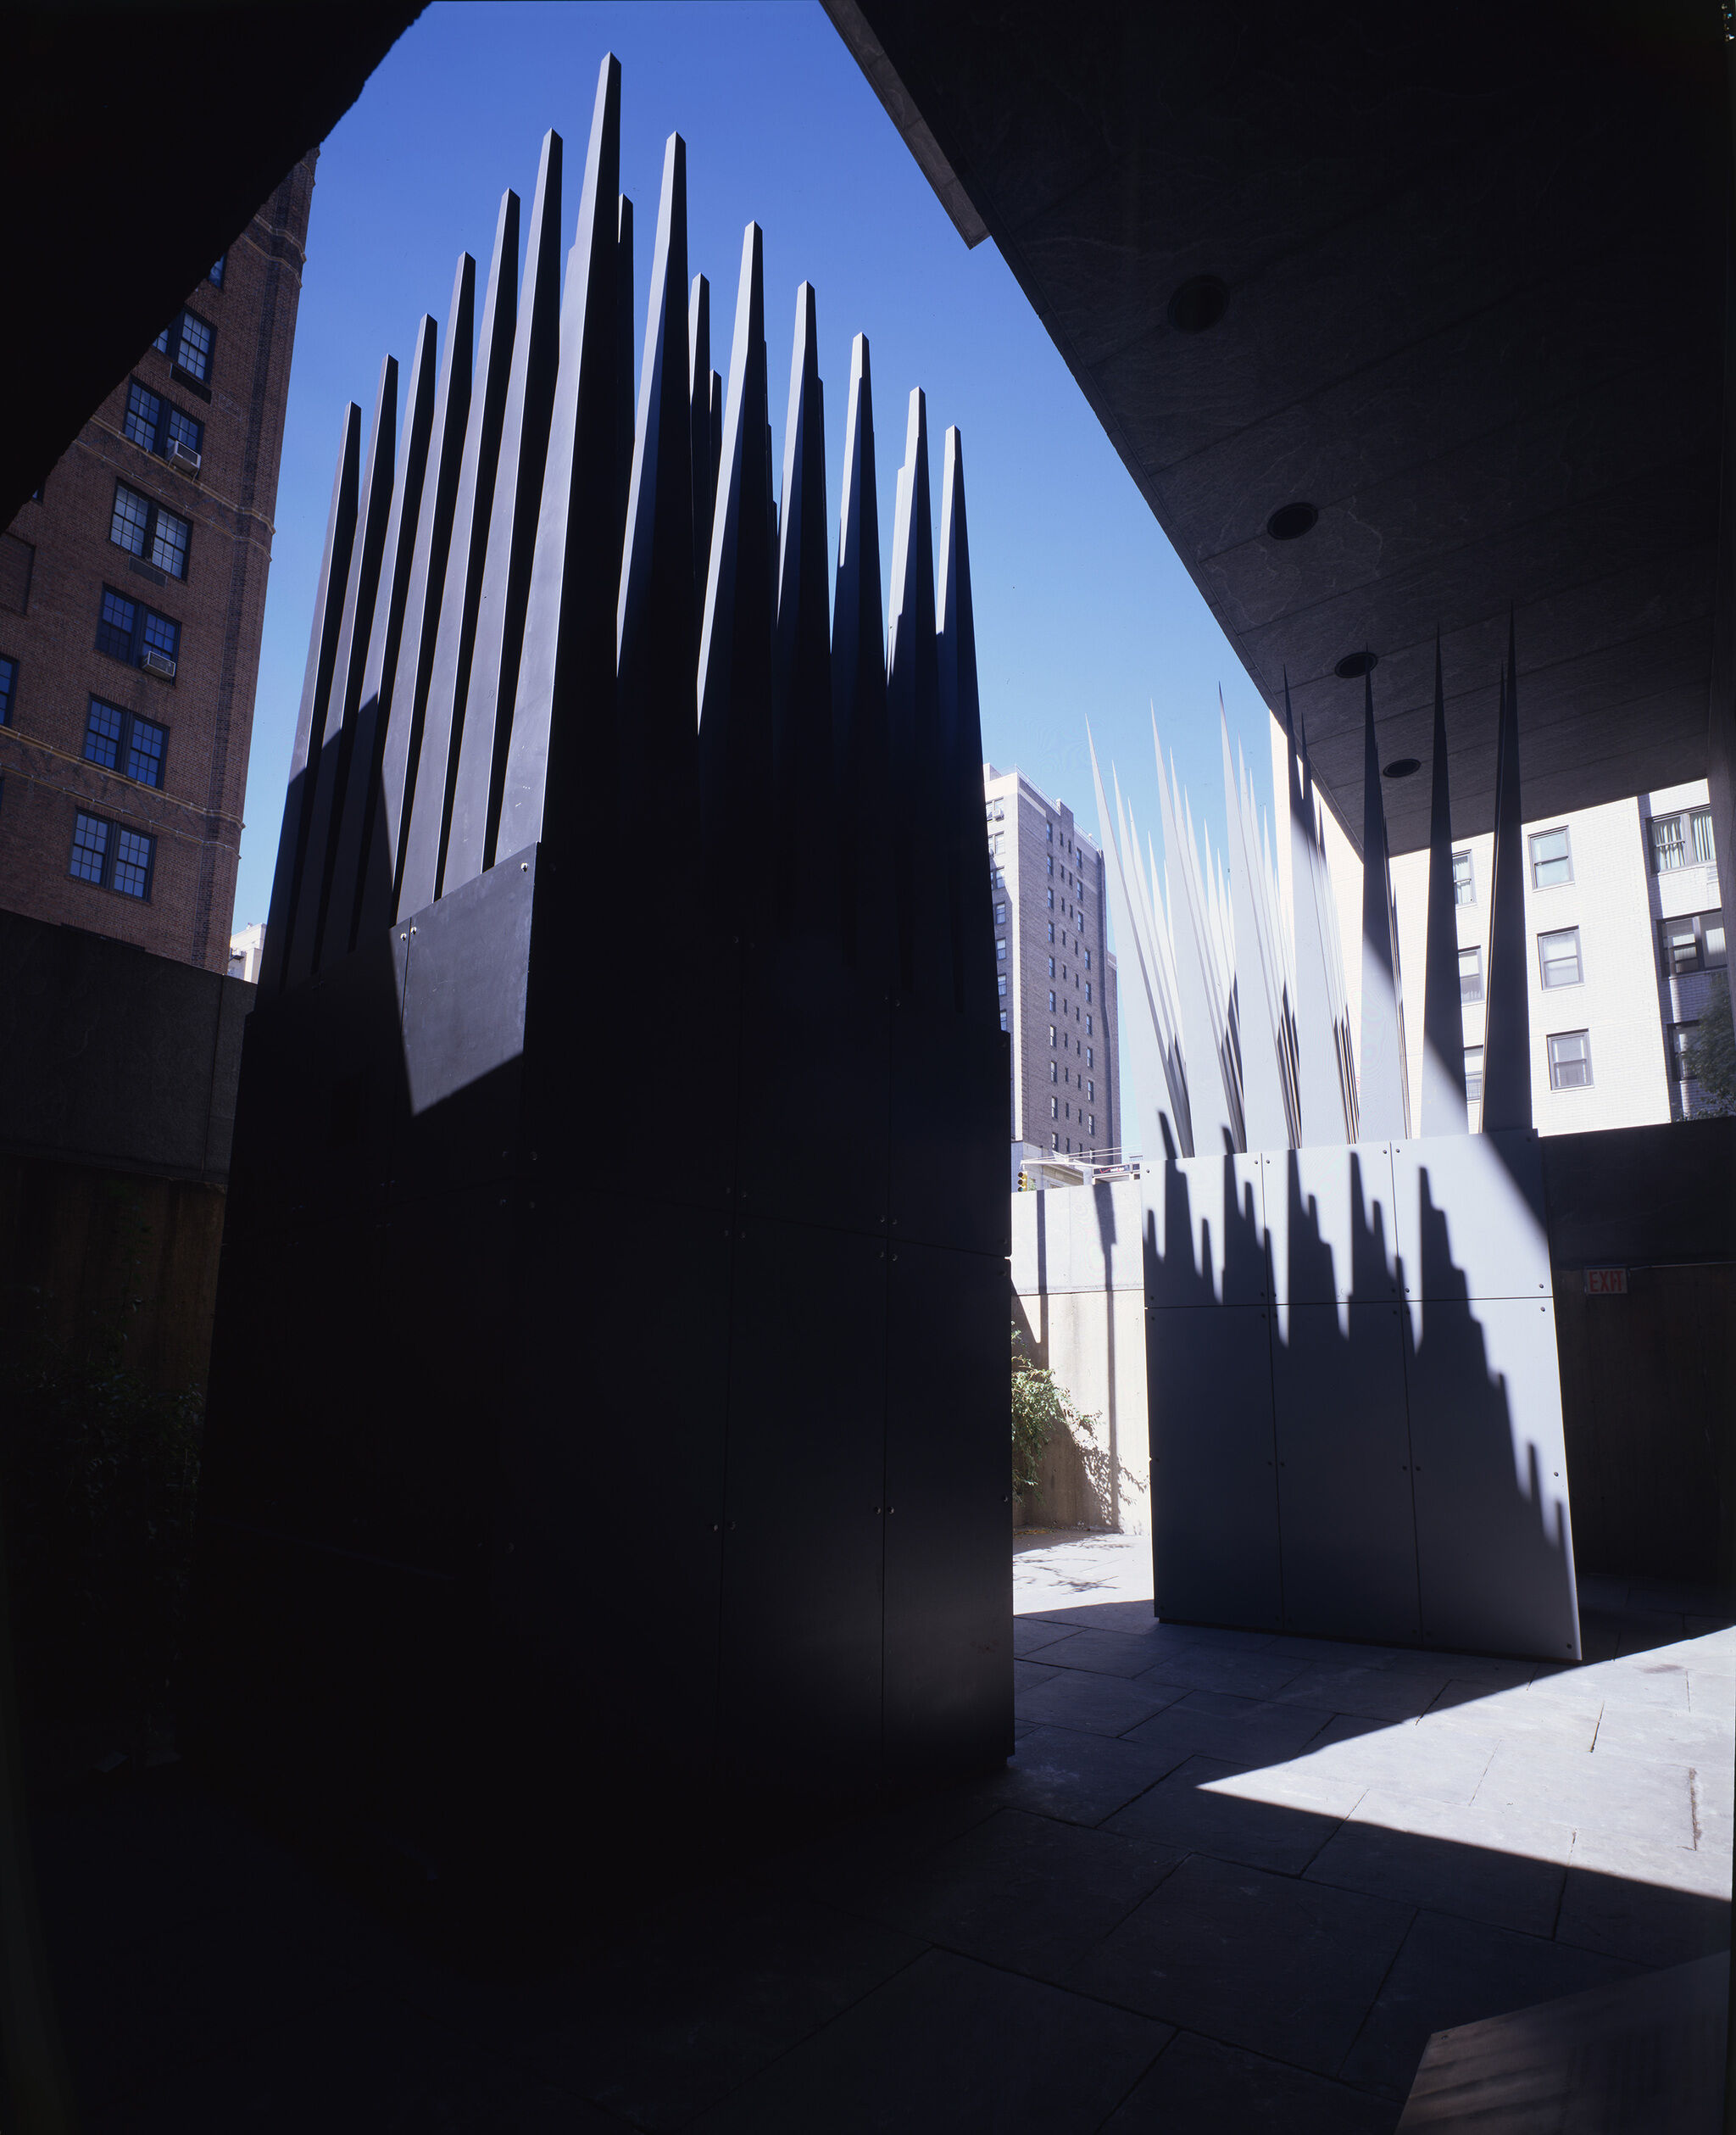 A sculpture with a rectangular base and long triangular parts pointing upwards.